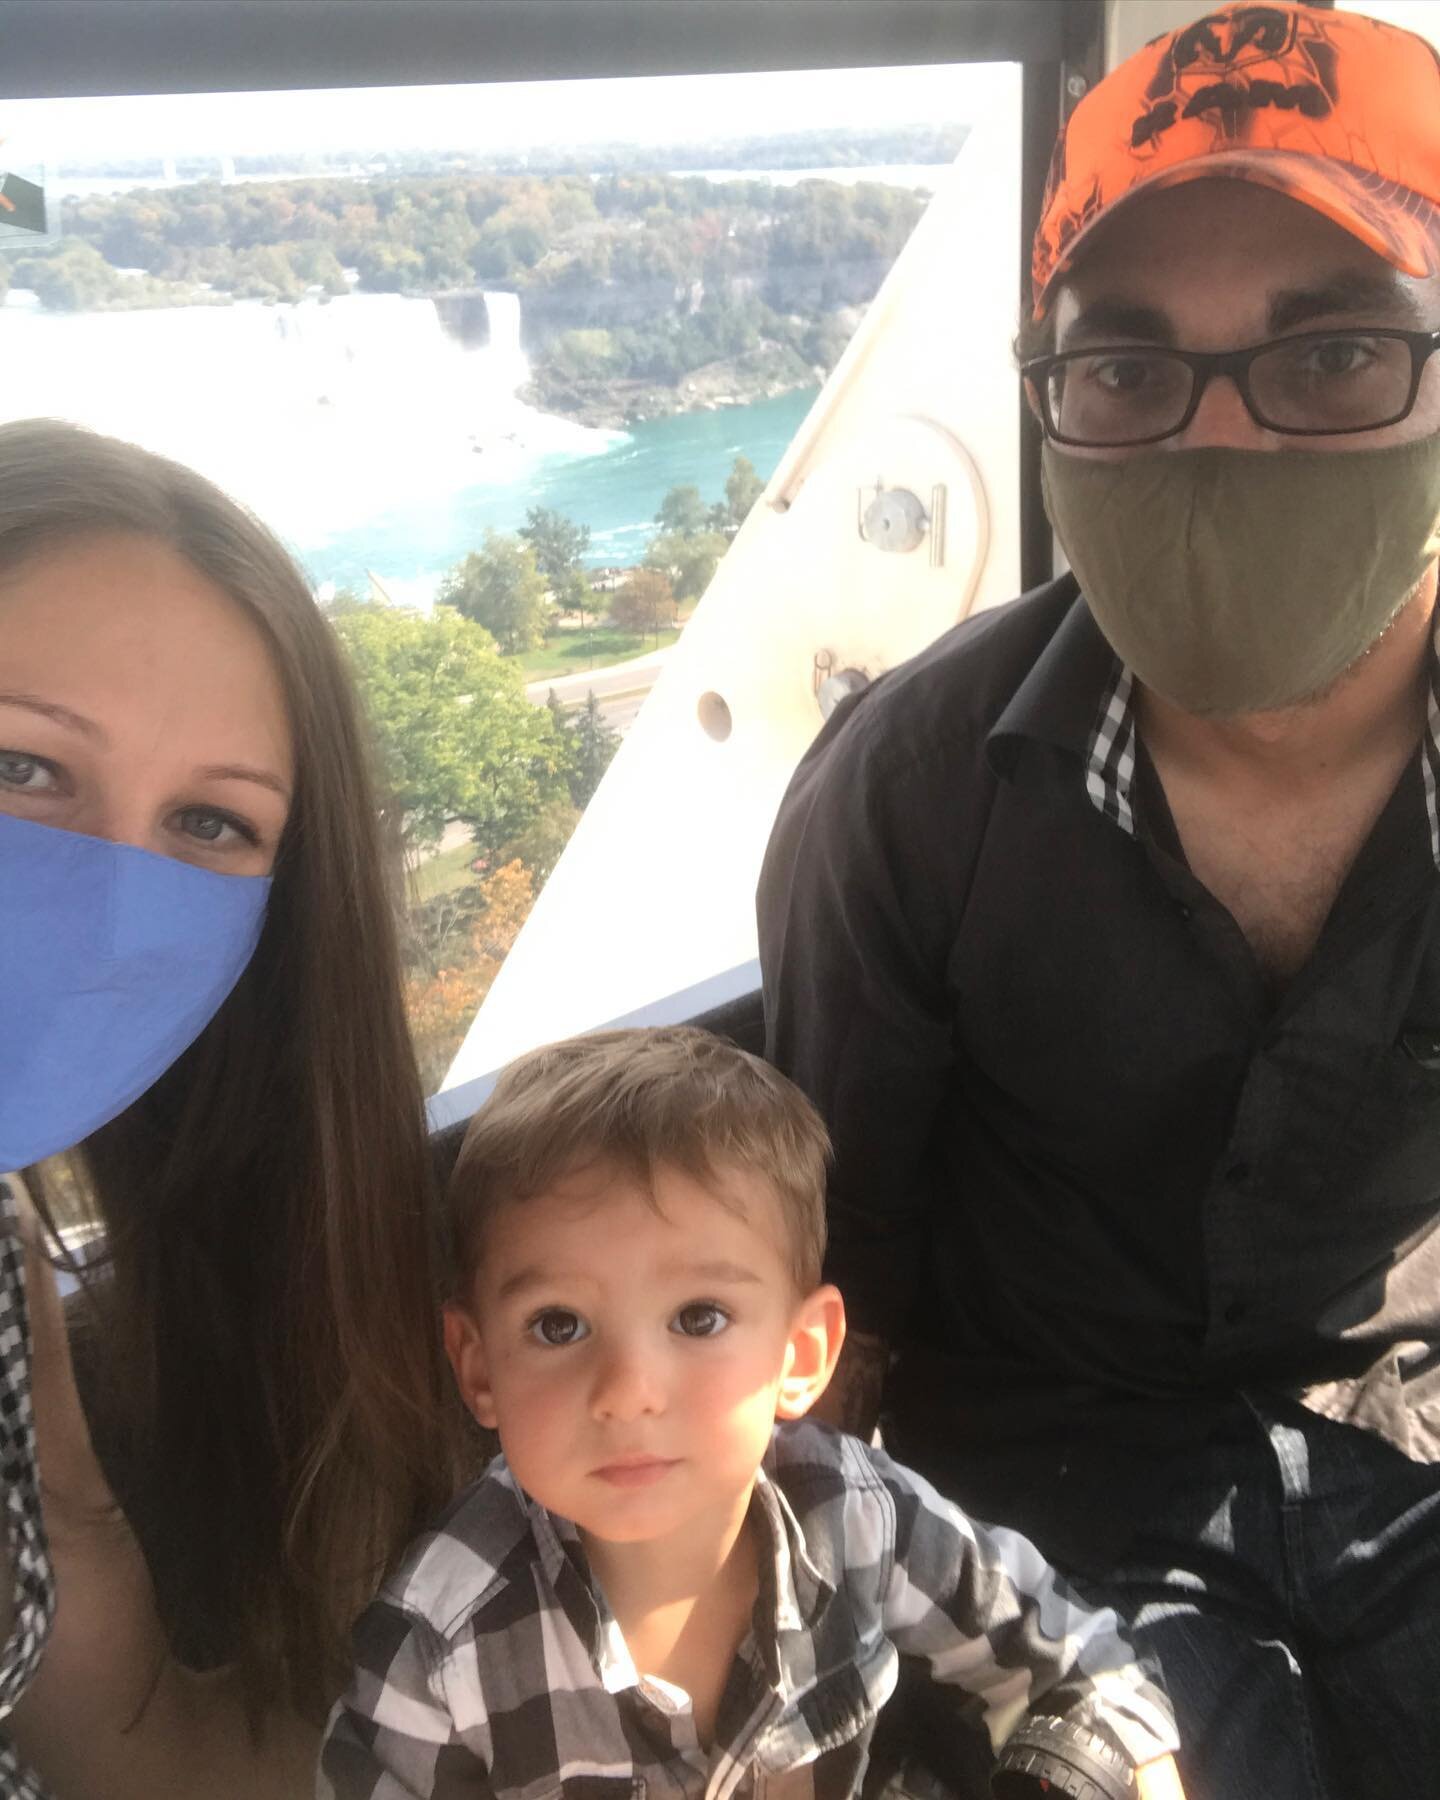 We spent a night in Niagara Falls last weekend for a quick family getaway before Baby Girl comes. We weren&rsquo;t sure if we&rsquo;d feel comfortable being out so we booked a room with a falls view and a jetted tub, but it wasn&rsquo;t that busy and